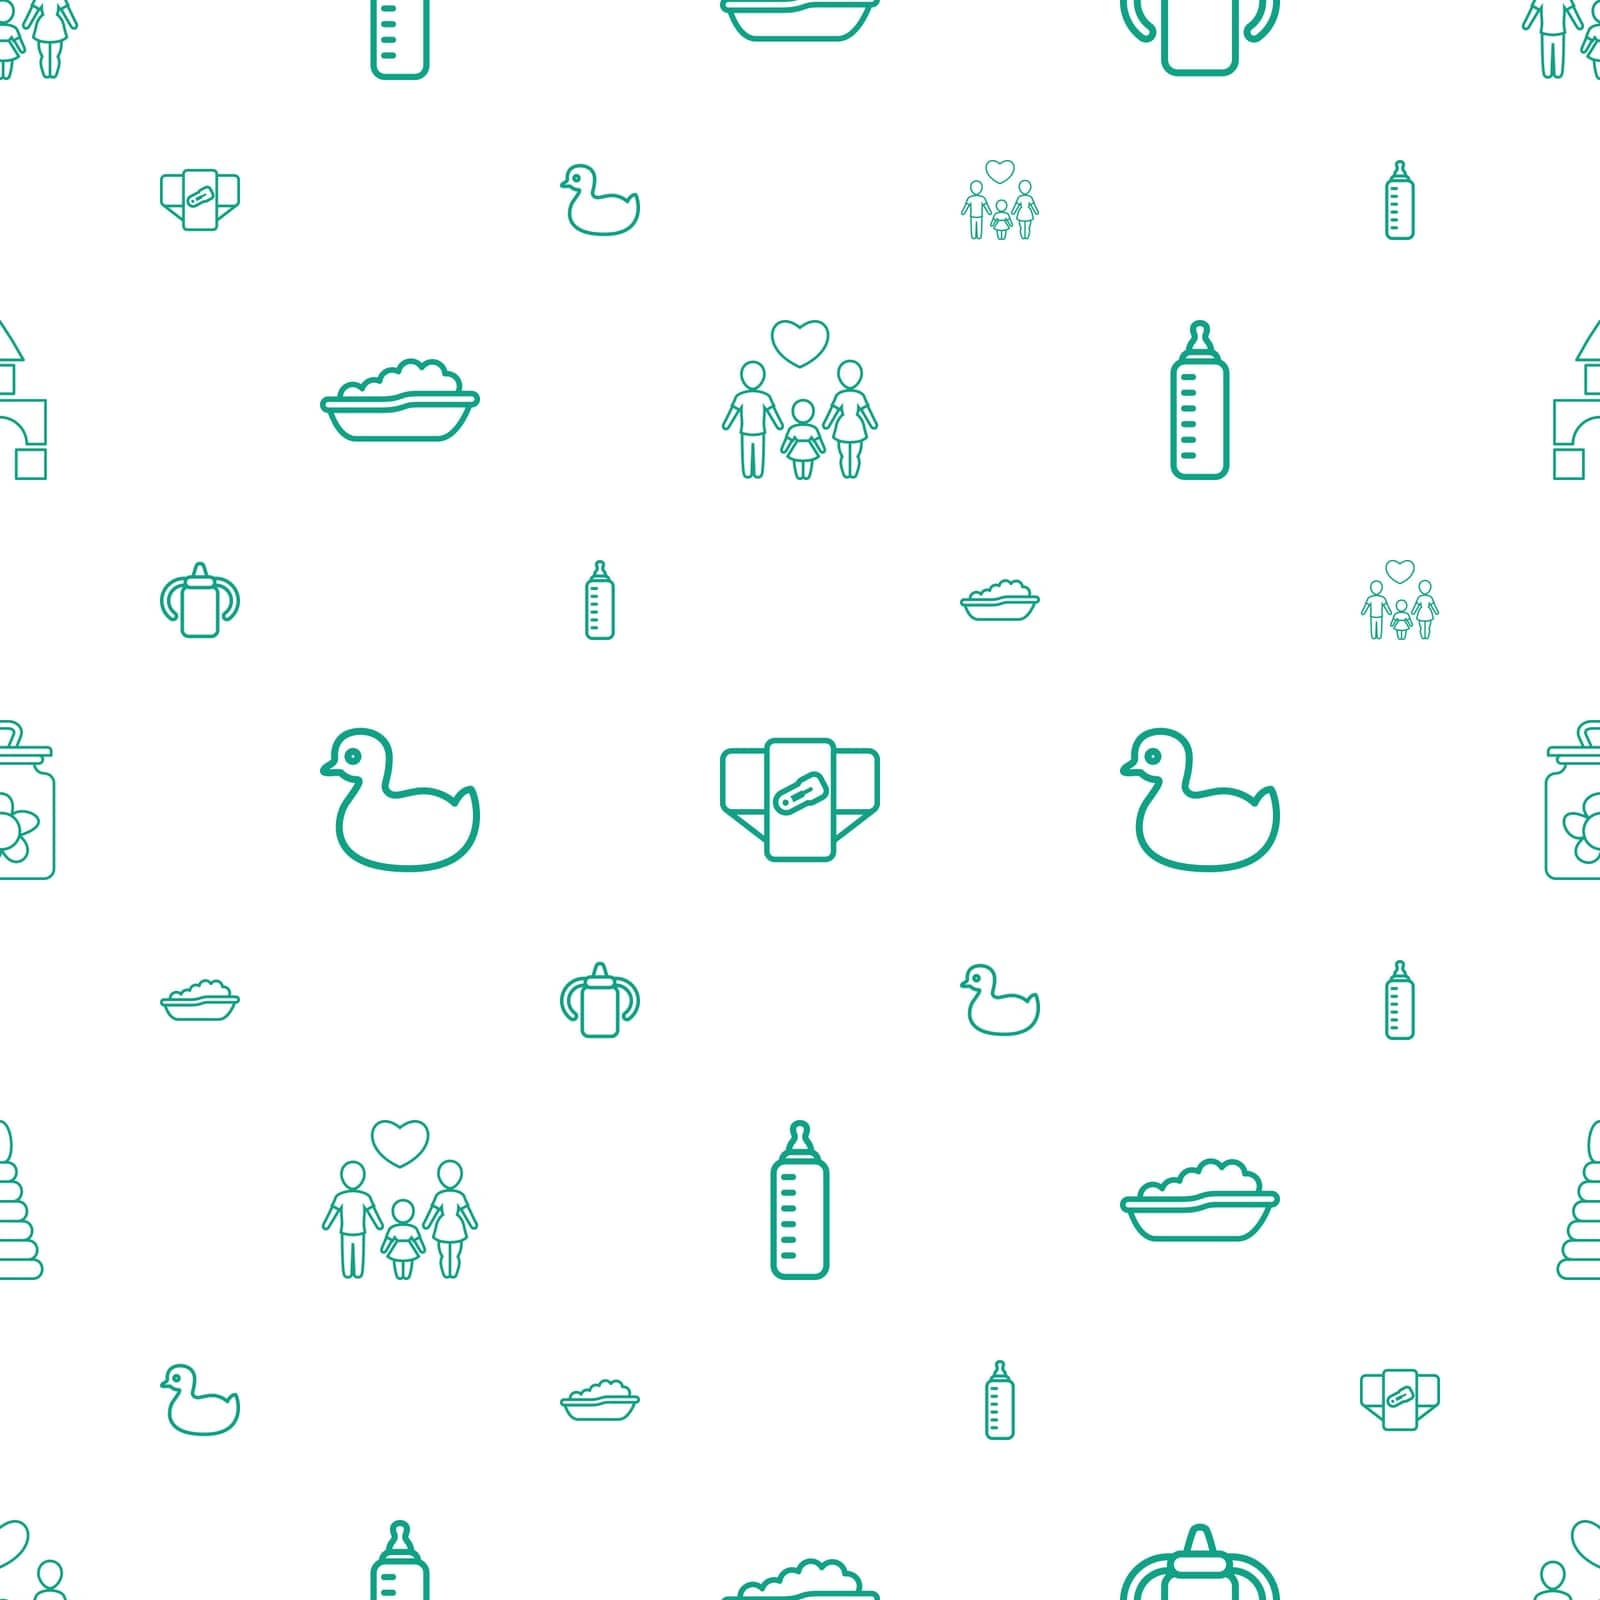 play,symbol,game,nipple,happy,kid,concept,pattern,icon,sign,isolated,bottle,youth,toddler,white,flat,duck,design,block,vector,nobody,bath,graphic,tower,element,toy,shape,childhood,plastic,blue,background,baby,pyramid,illustration,diaper,family,fun,object,child